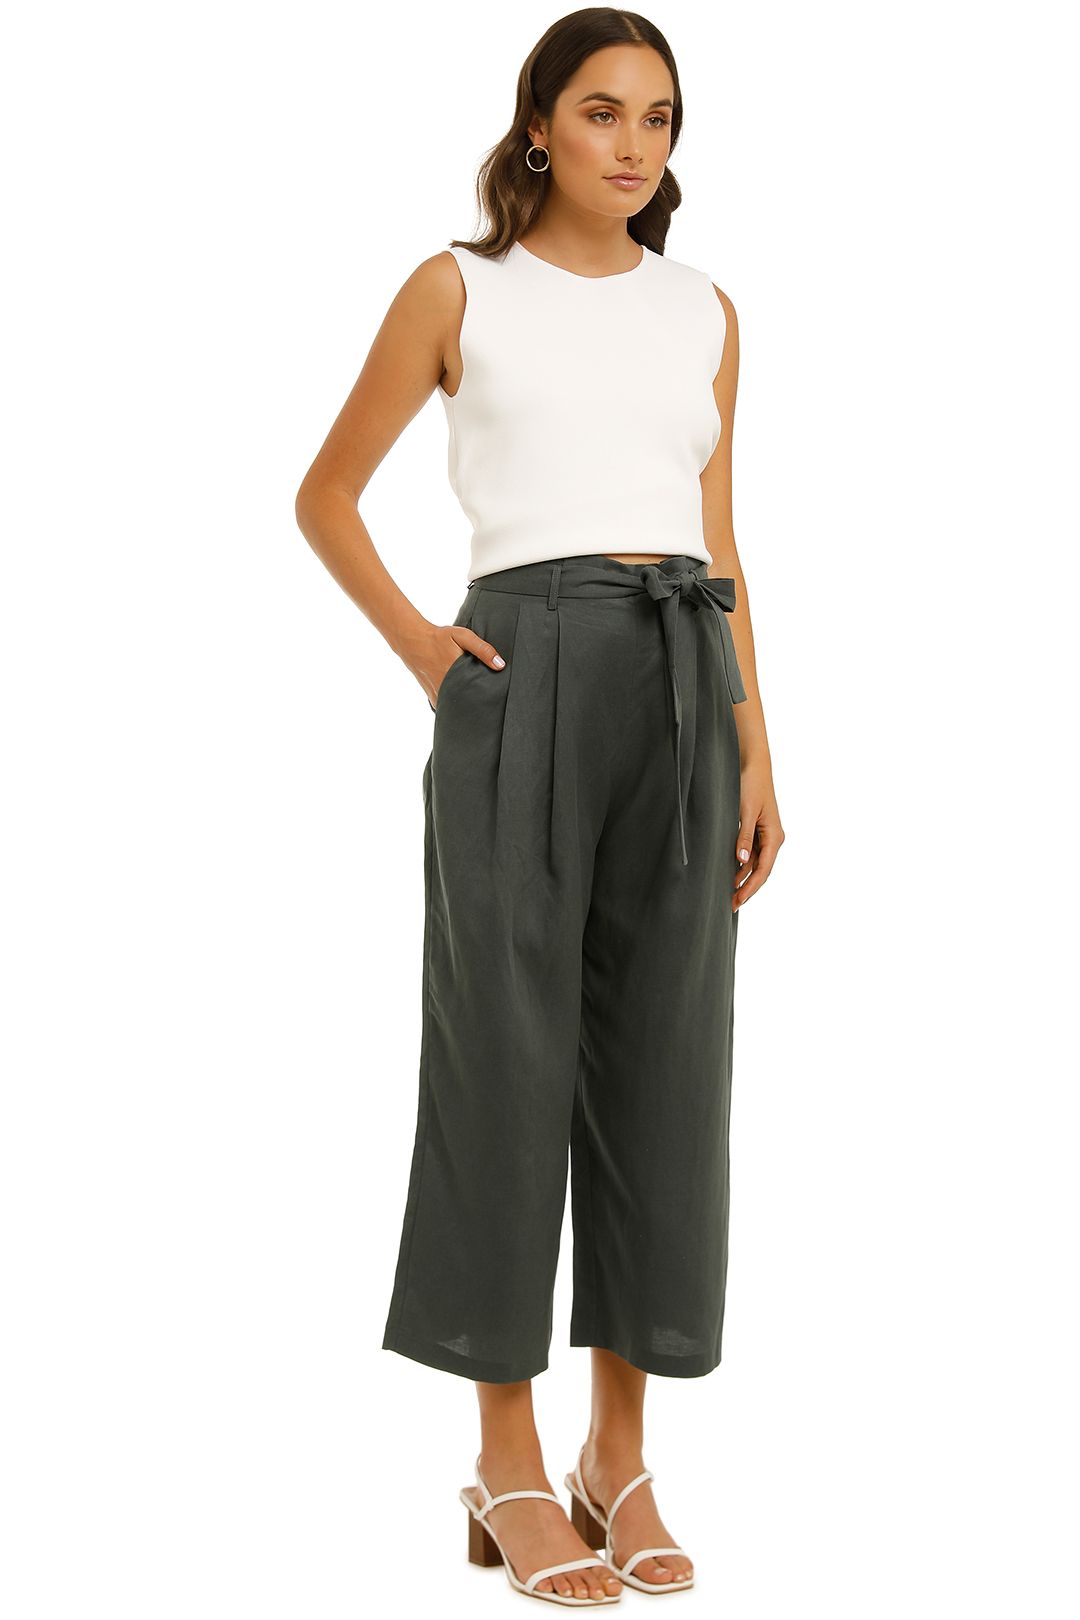 Waverley Pant in Thyme by Grace Willow for Hire | GlamCorner